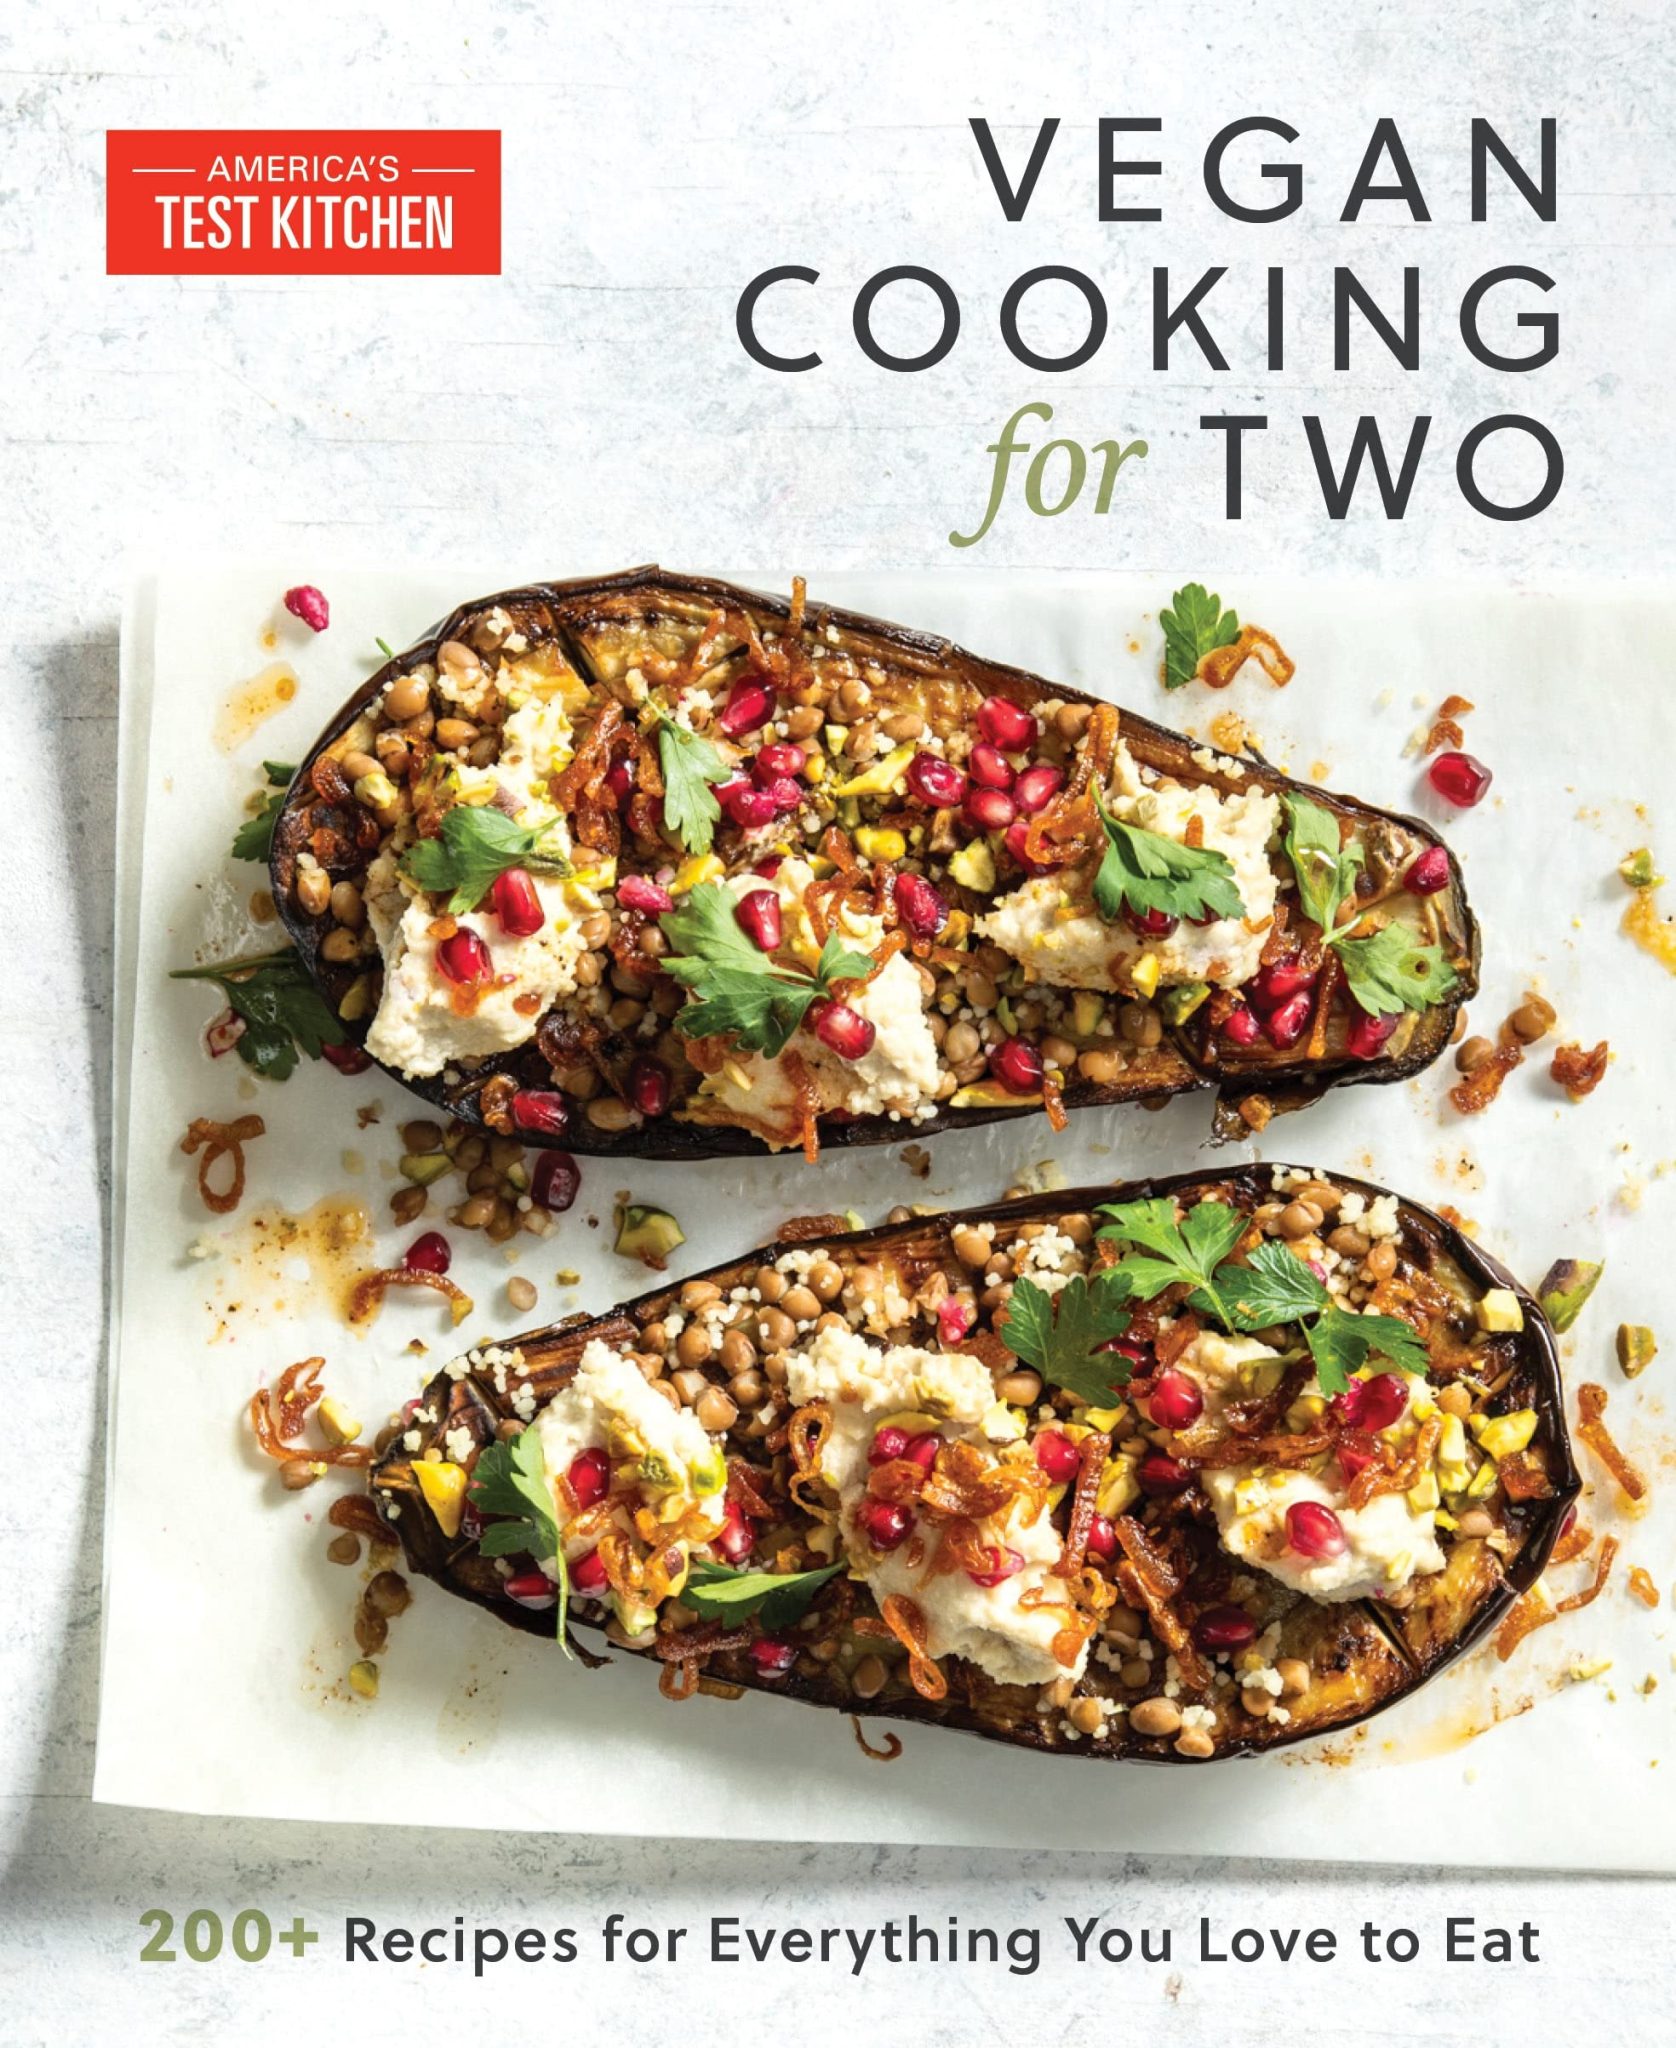 Vegan Cooking for Two by America's Test Kitchen